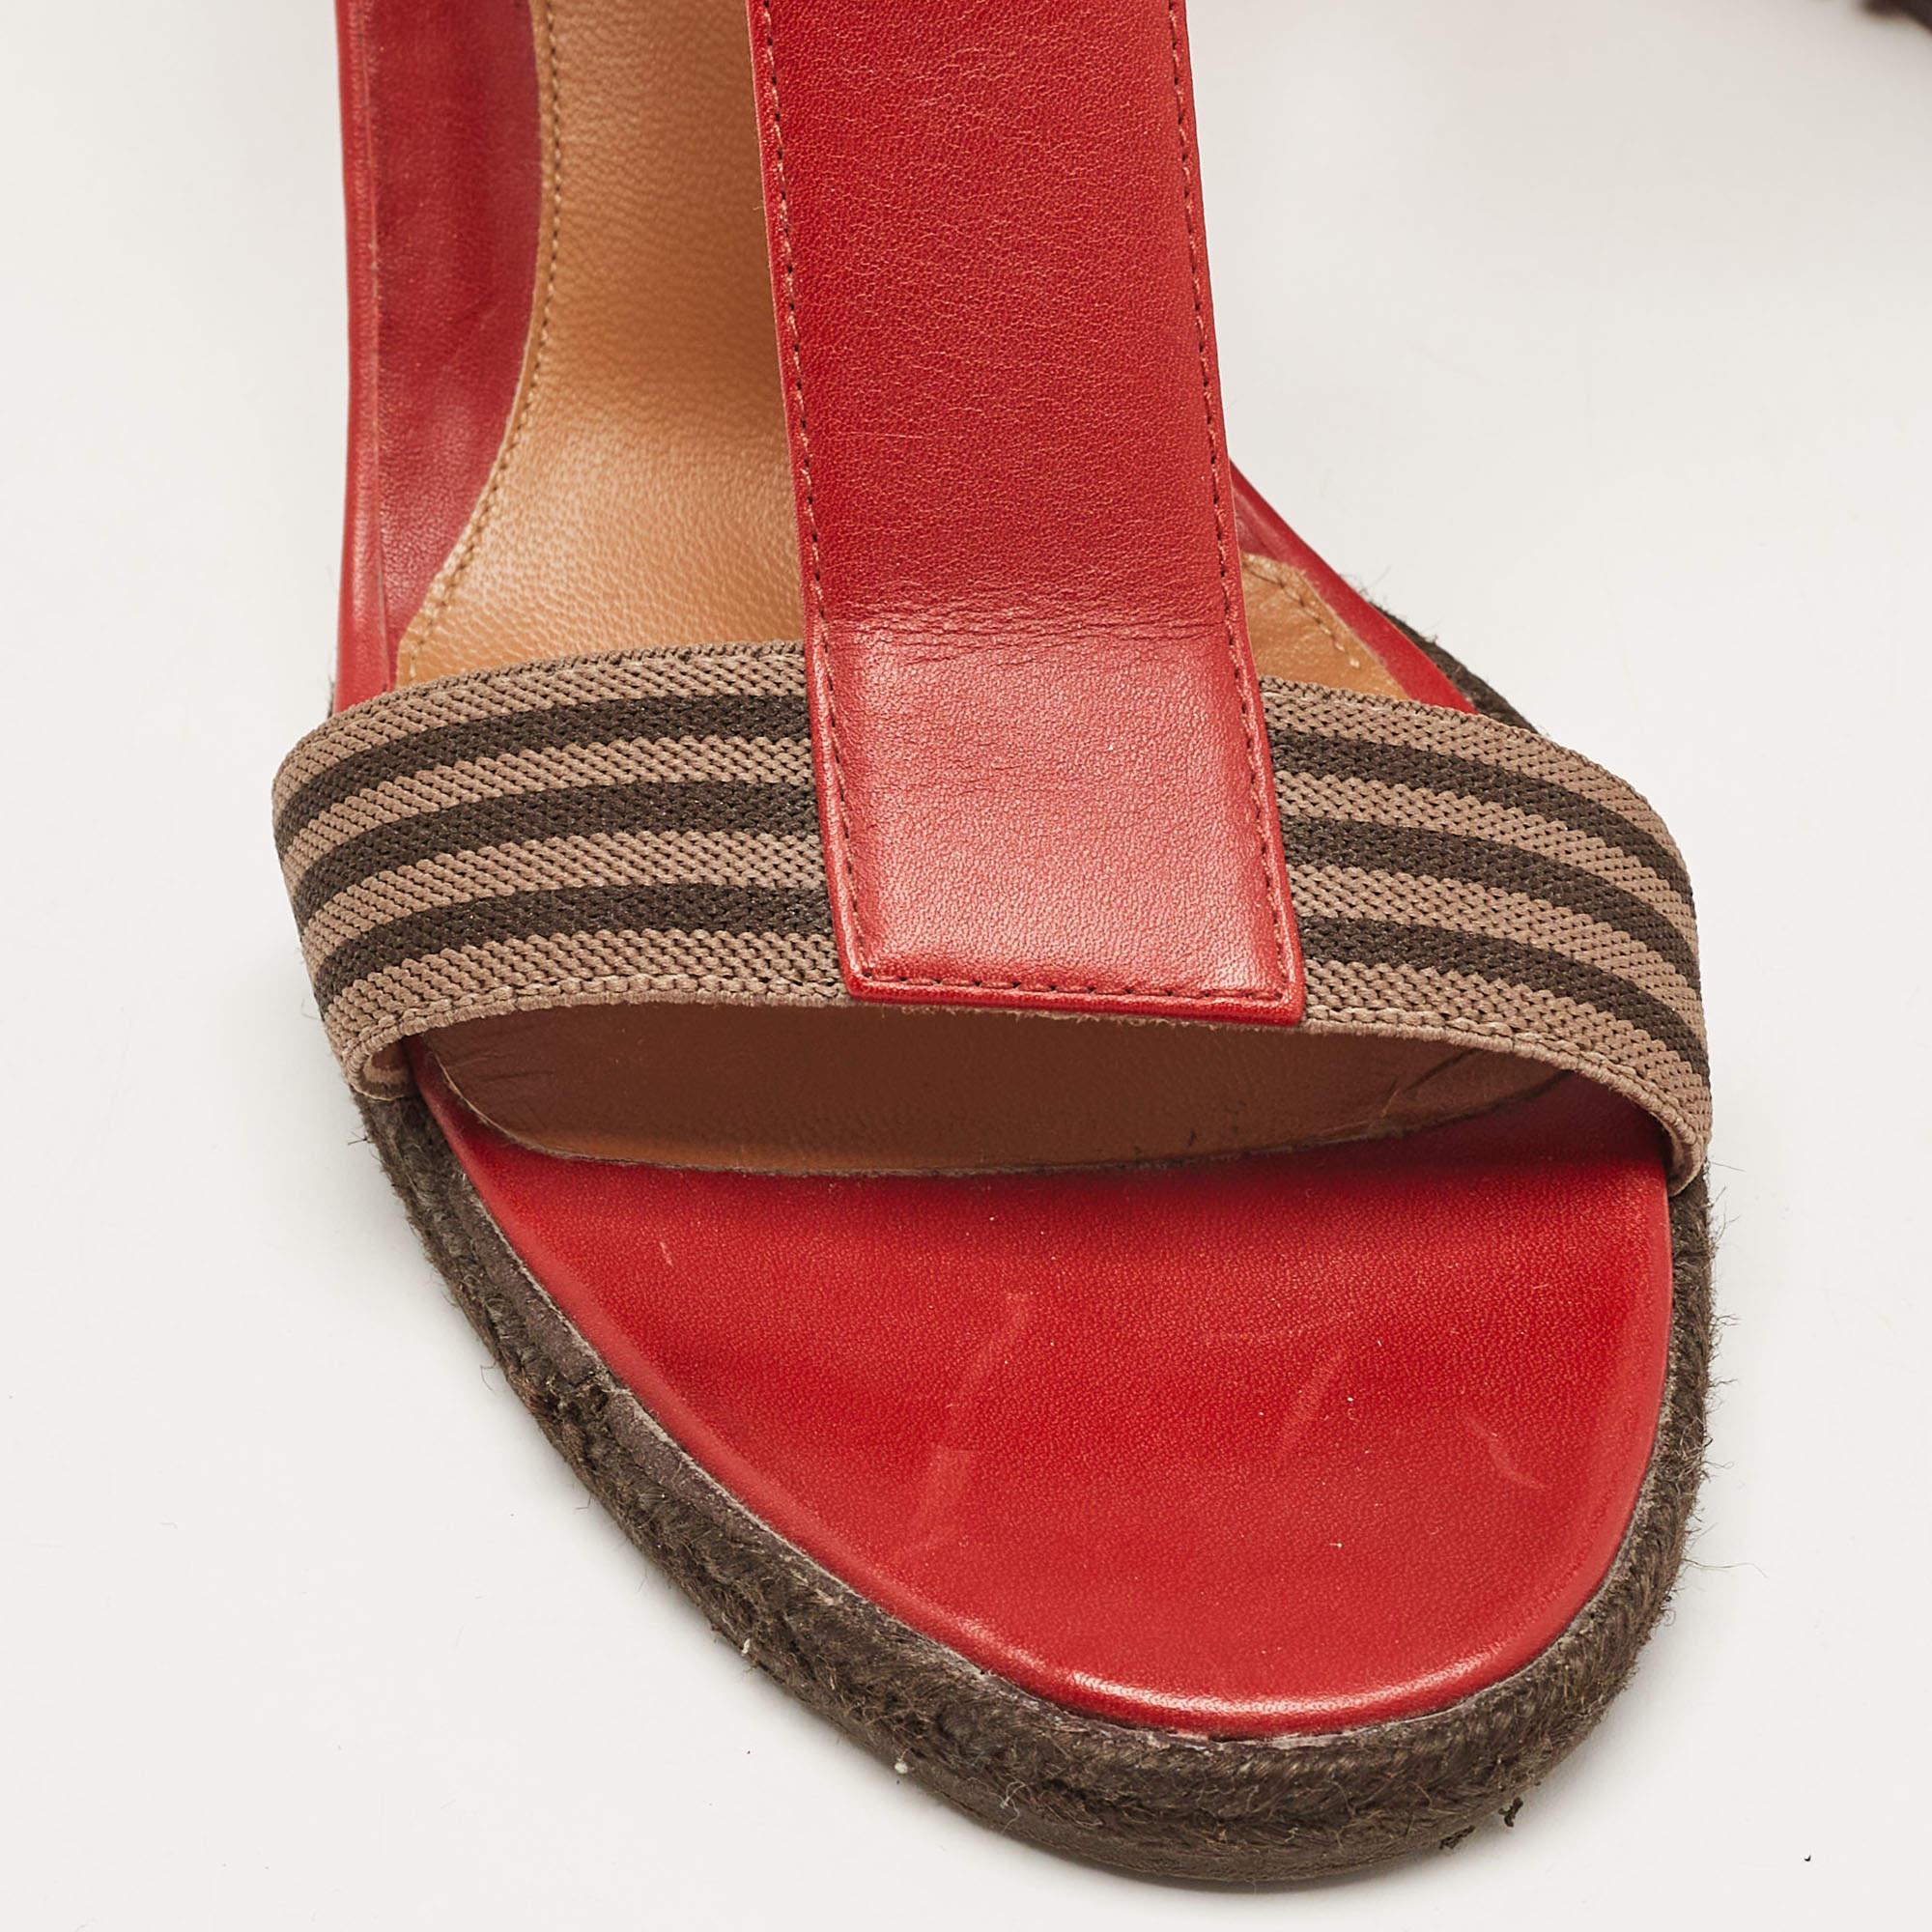 Fendi Red/Brown Leather and Elastic T-Strap Espadrille Wedge Sandals Size 39 For Sale 3